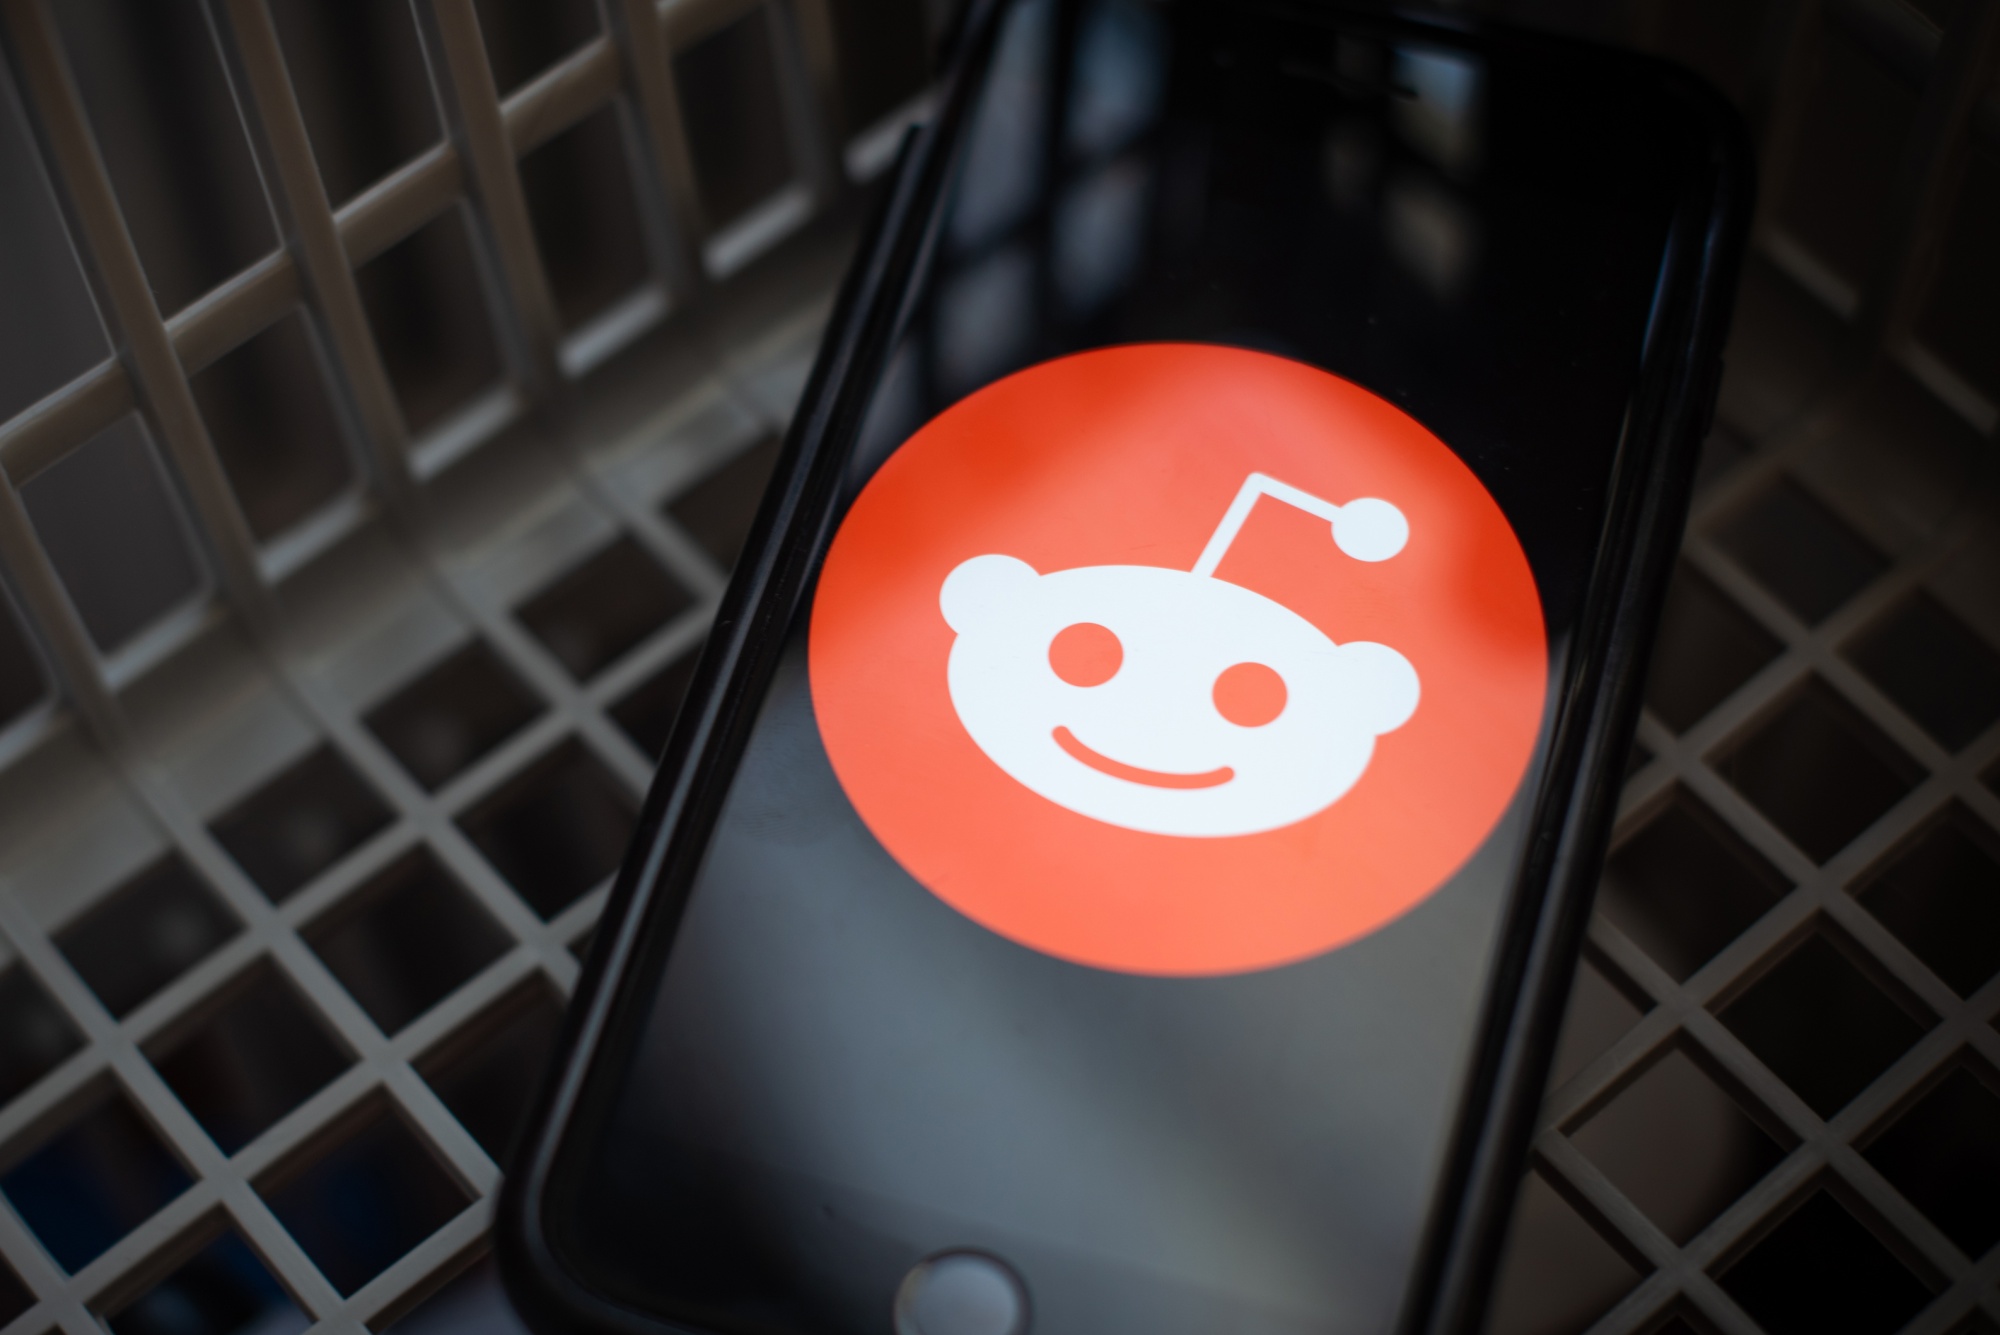 Why Are Reddit Pages Private? Subreddits Go Dark to Protest Third-Party Charges